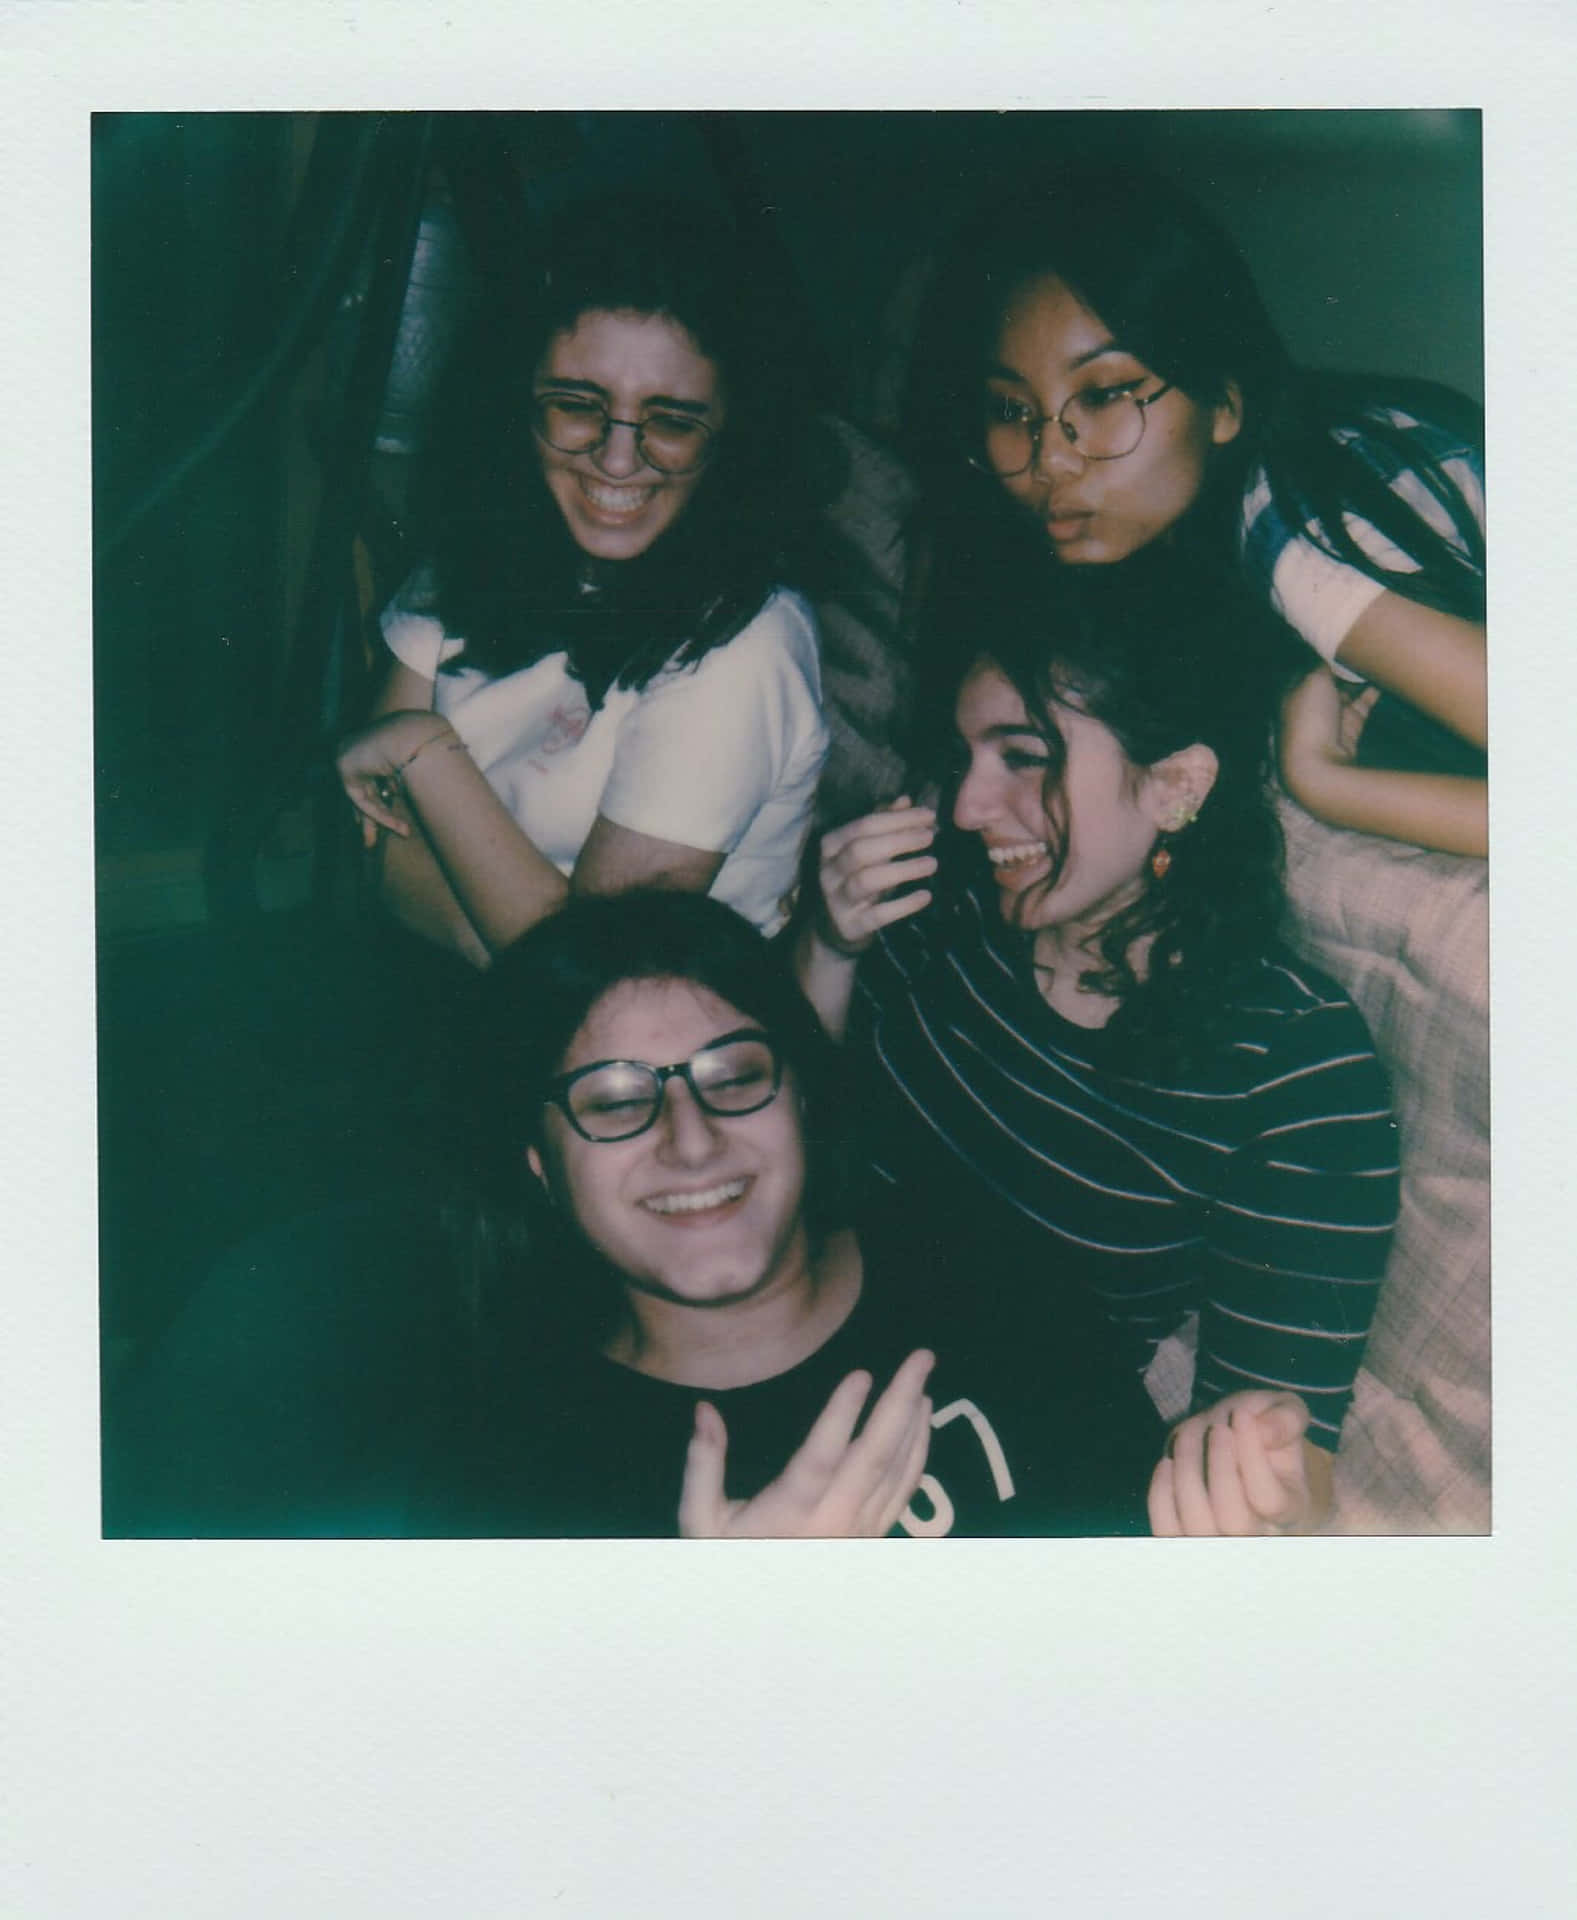 Captivating Retro Aesthetic Of Mature Teenagers With A Polaroid.